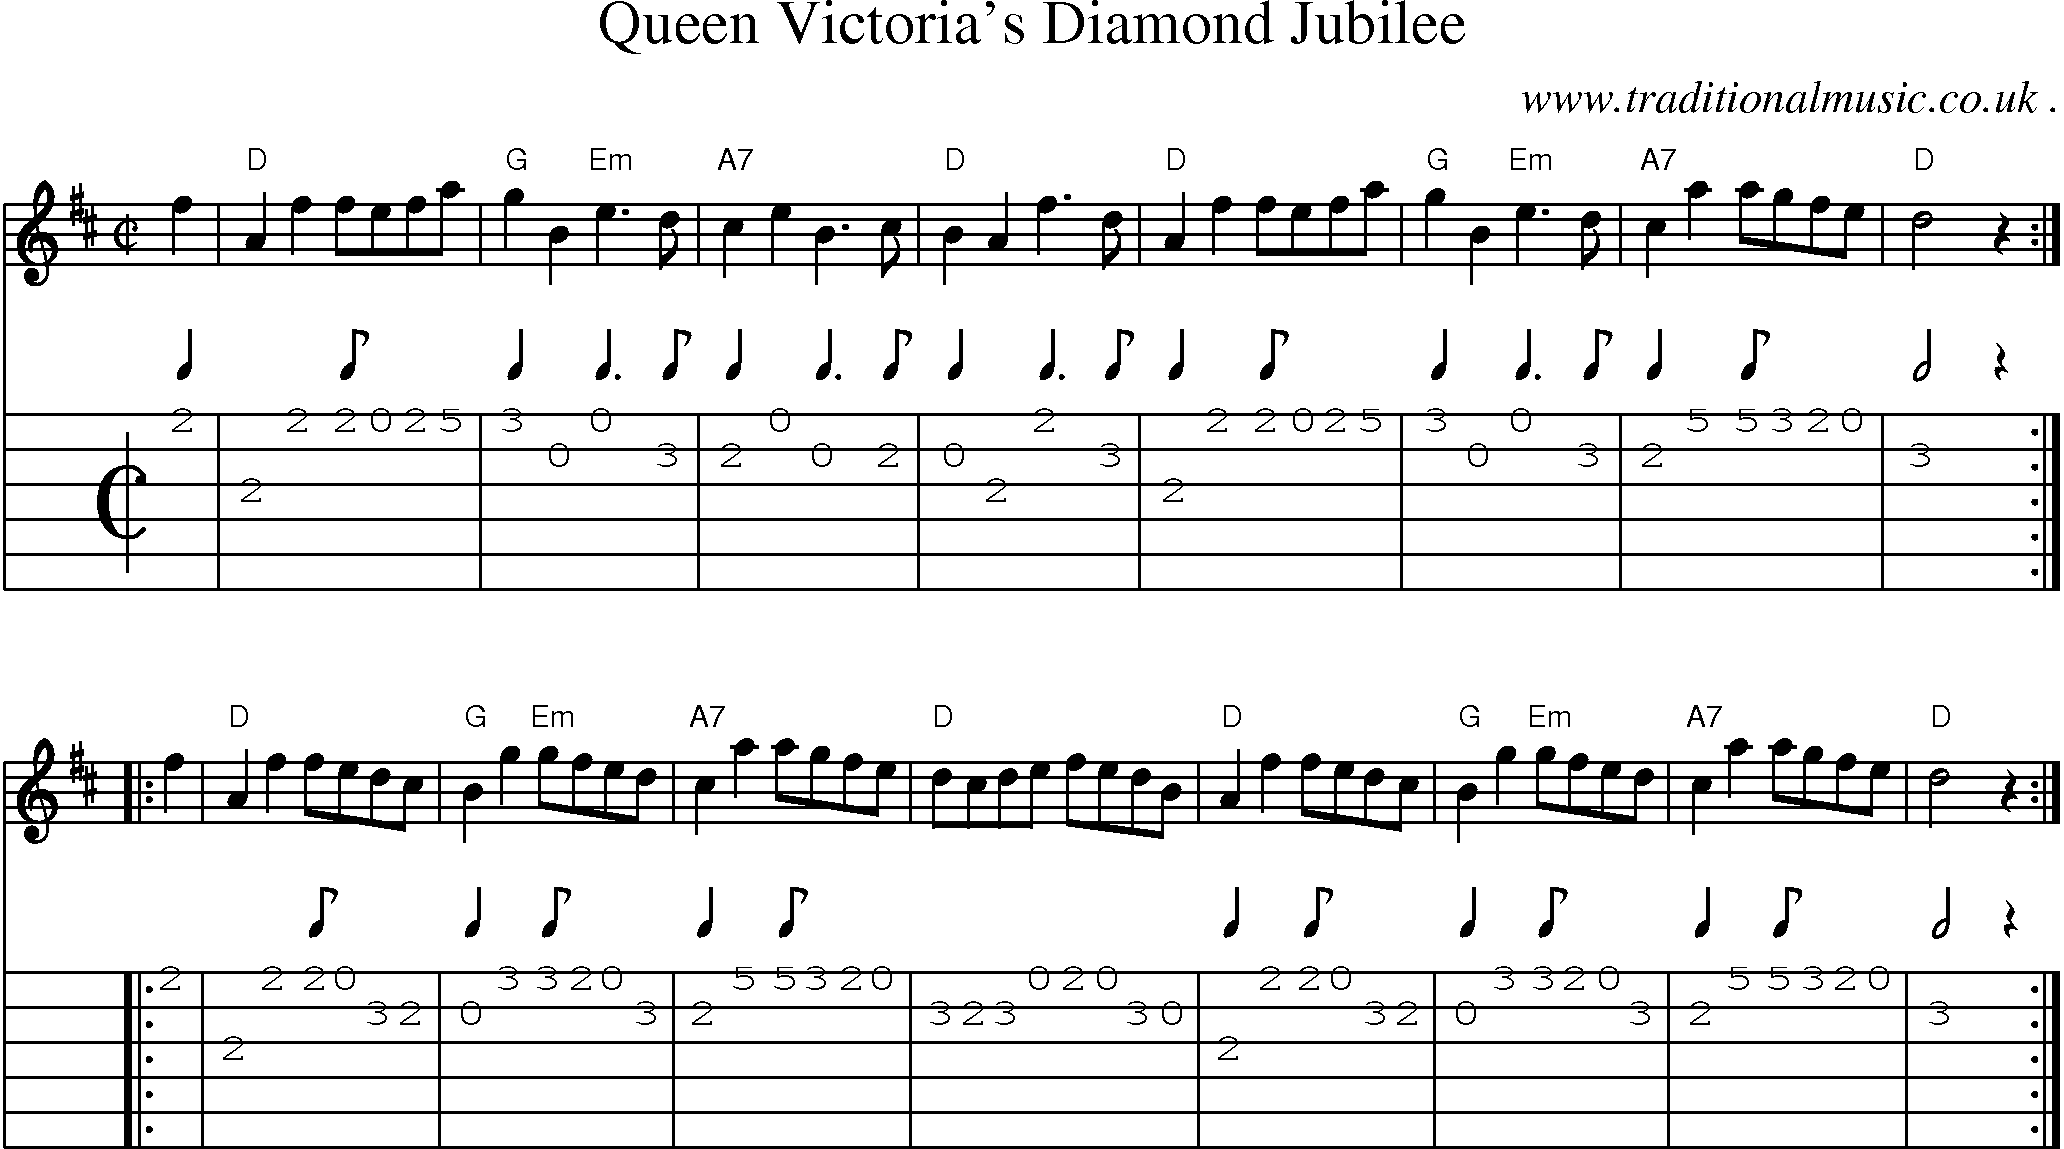 Sheet-music  score, Chords and Guitar Tabs for Queen Victorias Diamond Jubilee